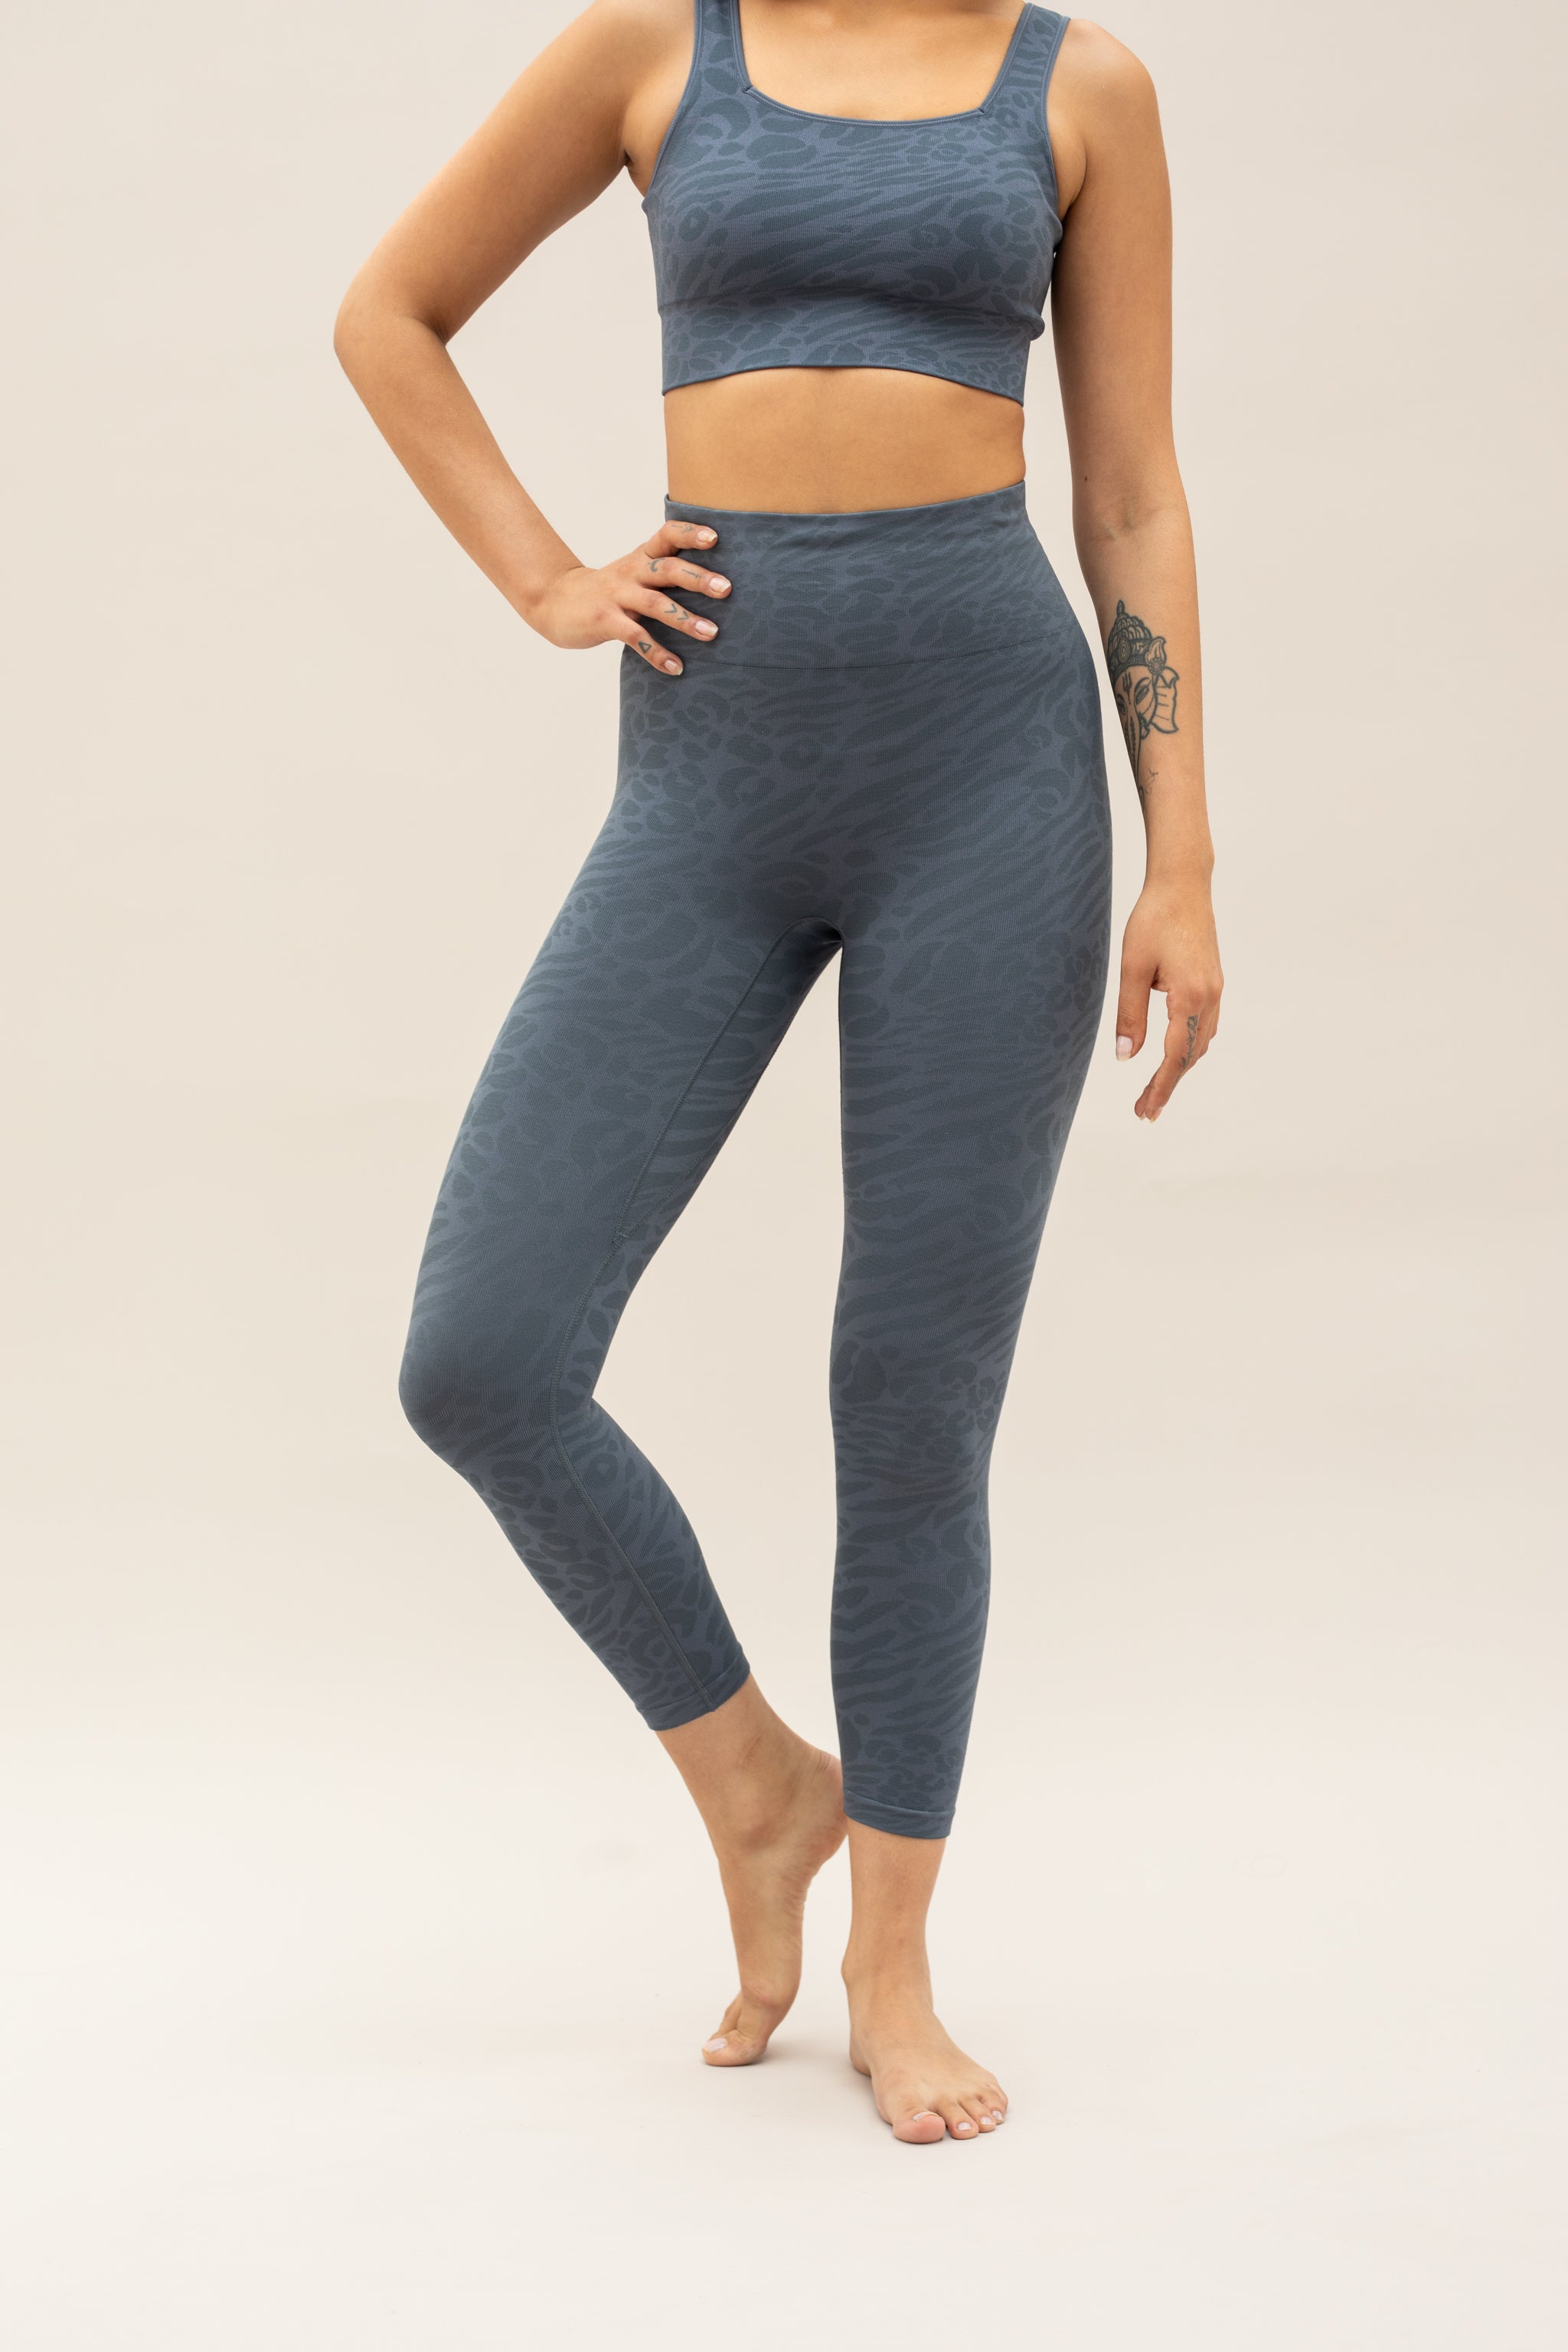 Blue leggings and blue supportive sports bra for sustainable activewear brand, Jilla.